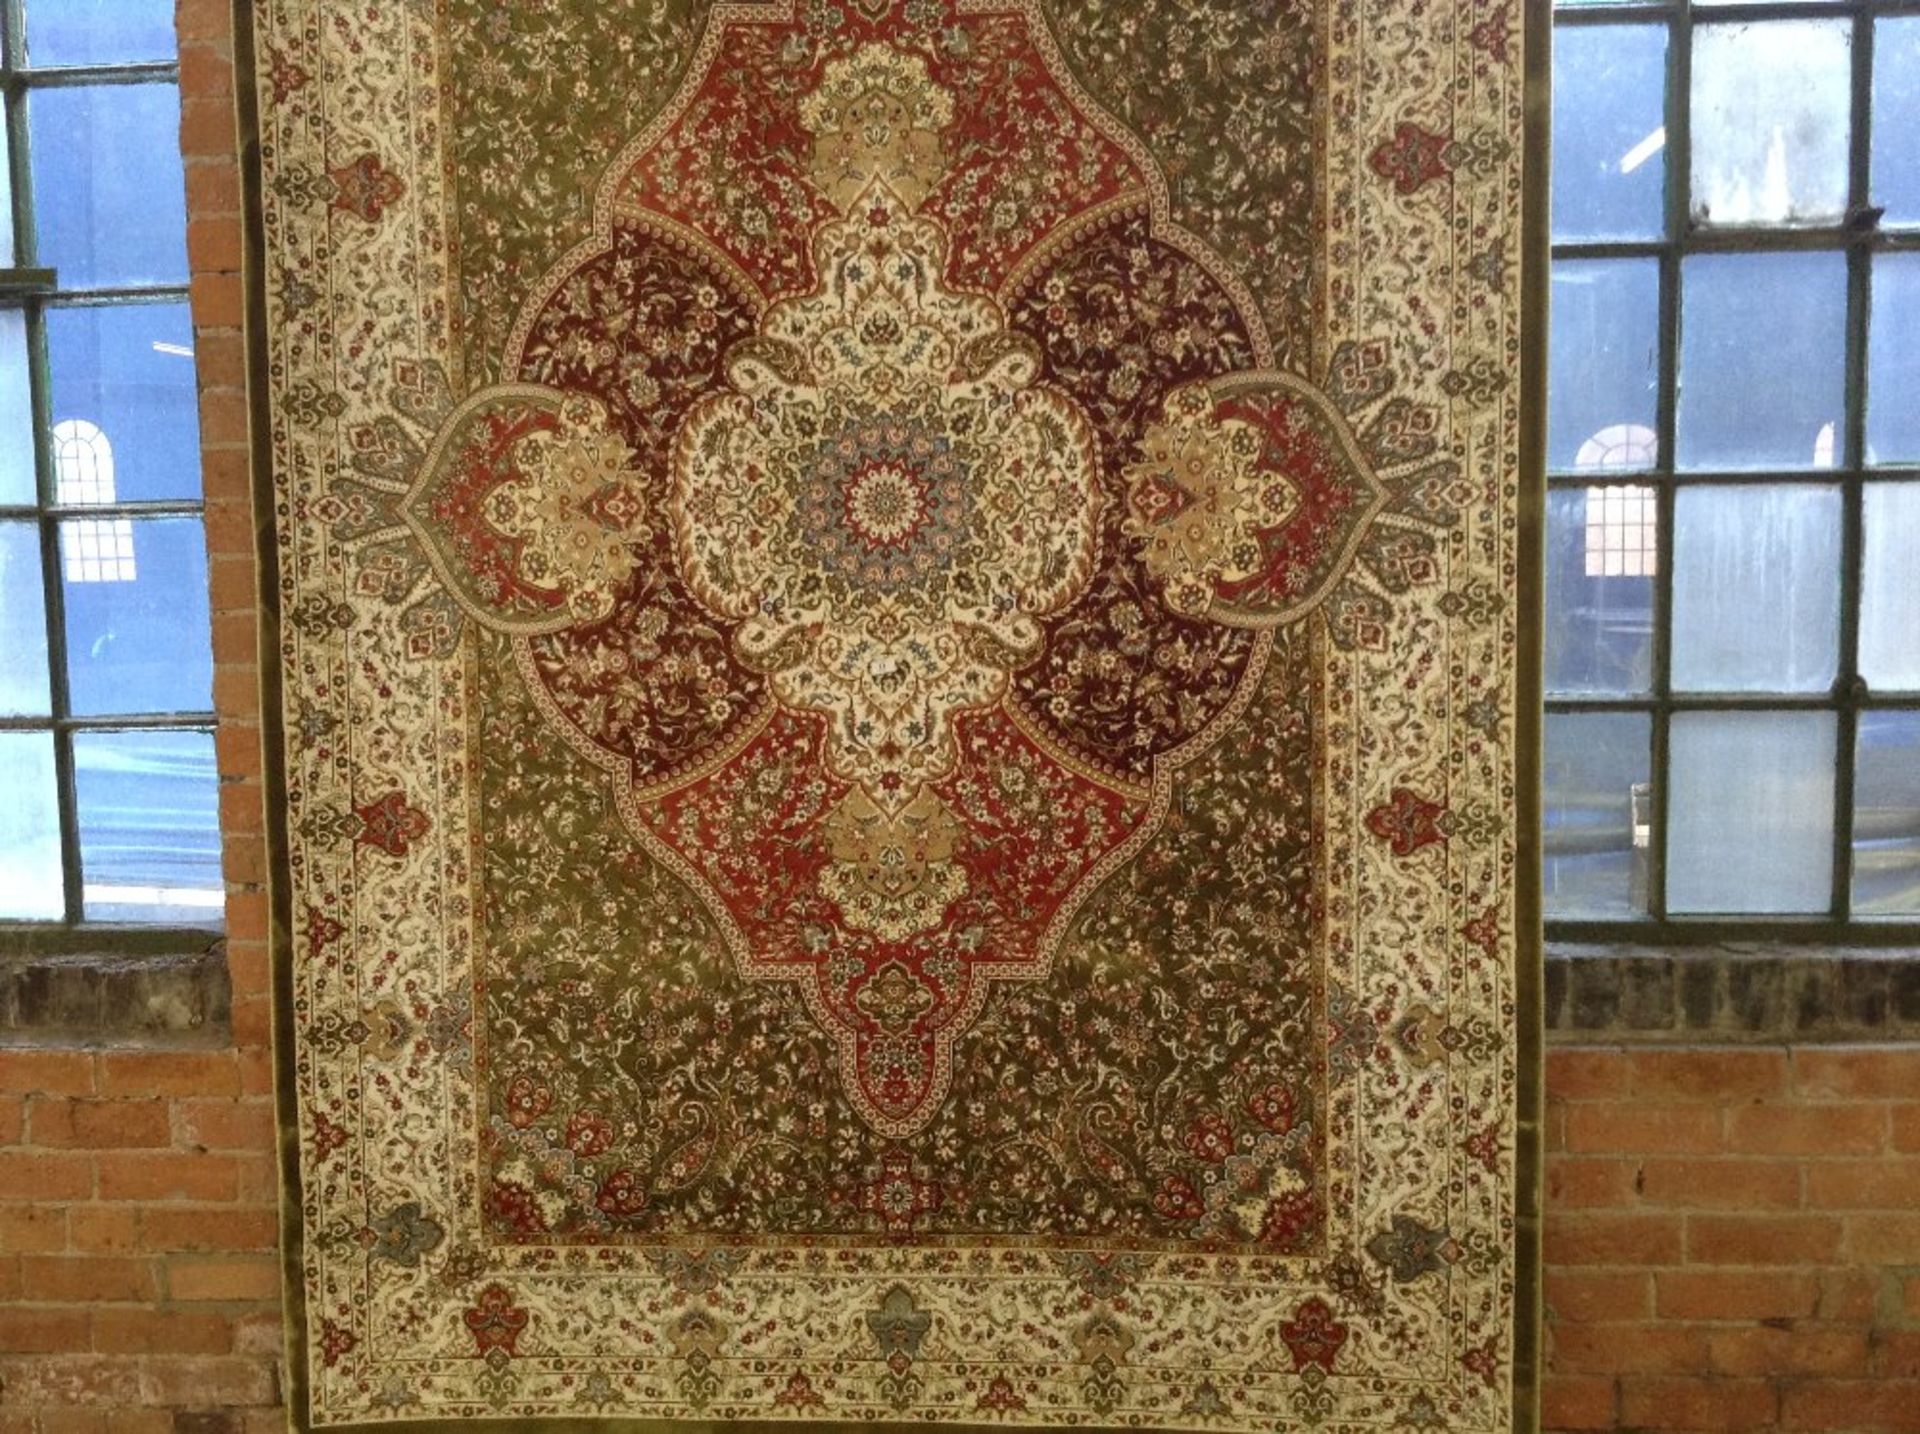 GREEN GROUND WOVEN SILK CARPET WITH TRADITIONAL ME